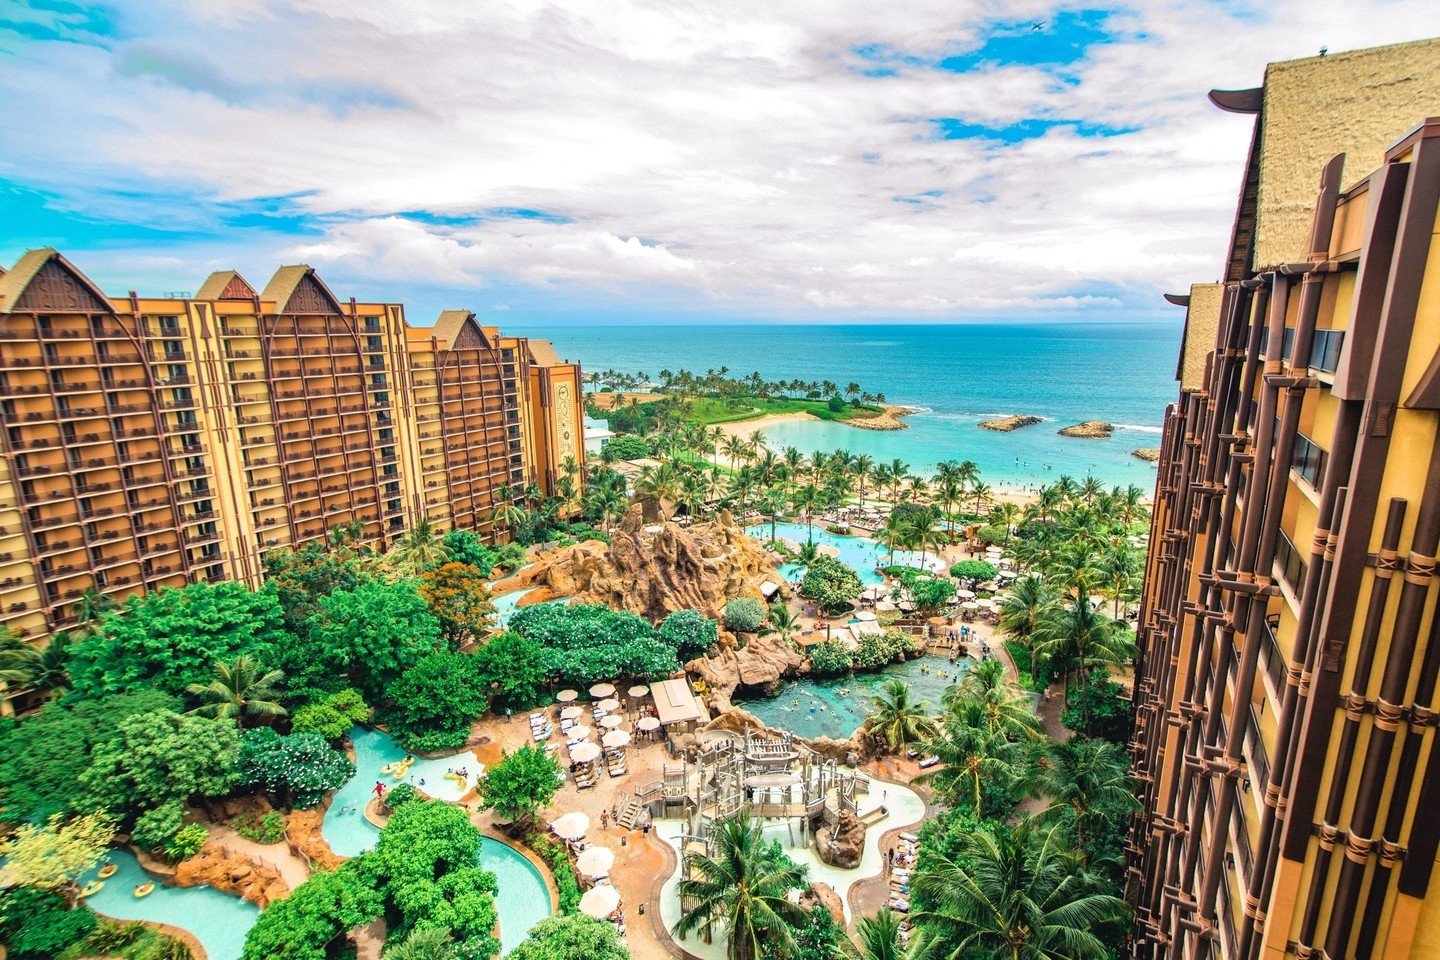 There's nothing quite like a view from your room at Disney's Aulani Resort and Spa. 😍⁠
⁠
What would you do first? Float down the lazy river or make waves at the beach? Tell us below! ✨️⁠
⁠
📸 @disney @disneyaulani⁠
.⁠
. ⁠
⁠
⁠
#peoplemovertravel #aul